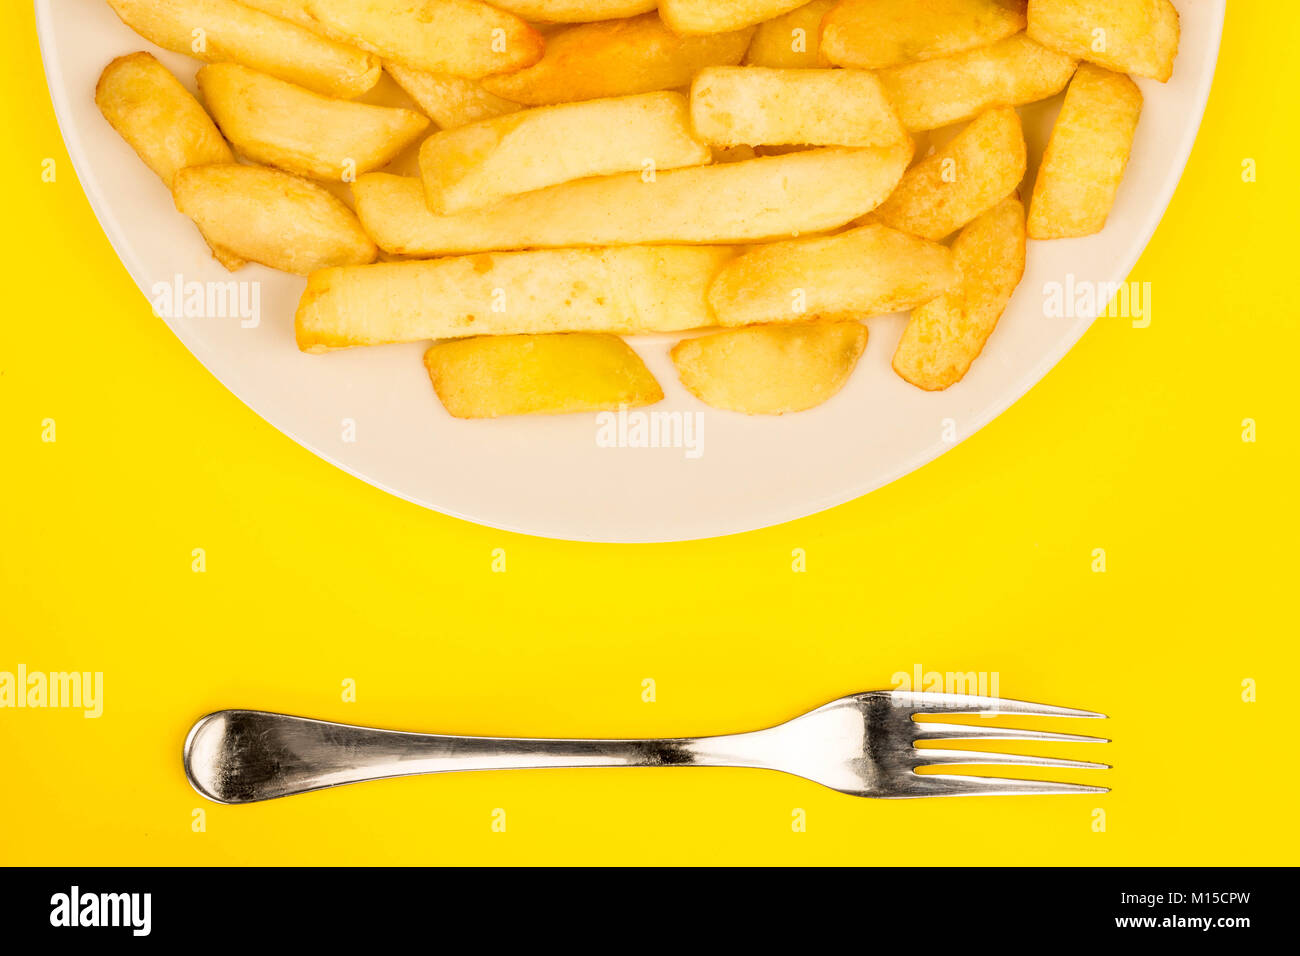 Plate of Chips Against A Yellow Background Stock Photo